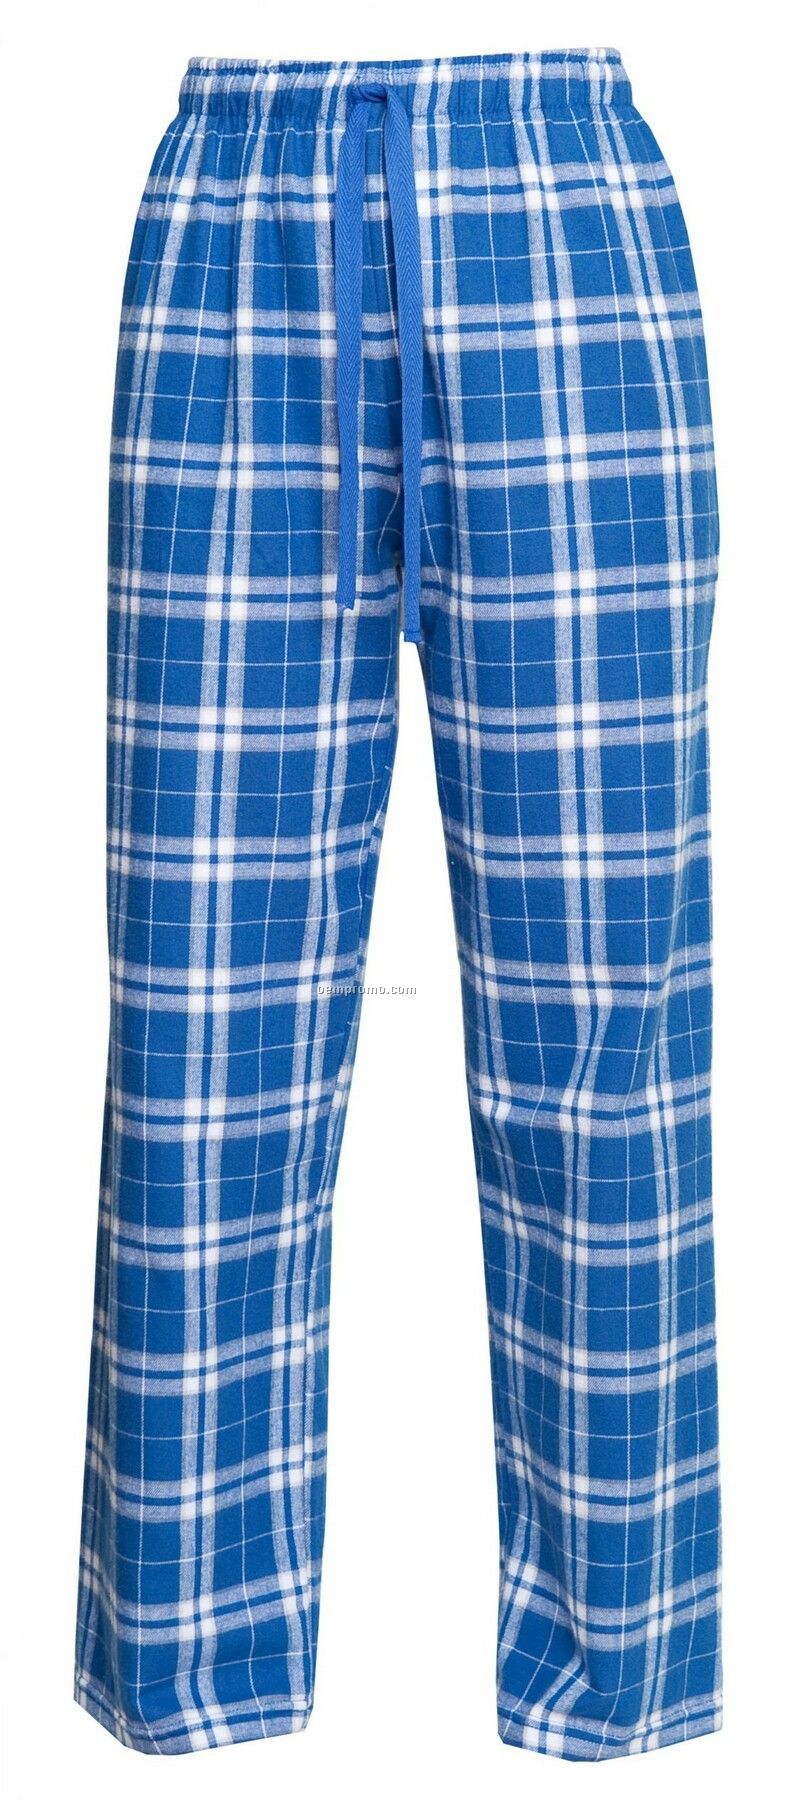 Youth Team Pride Flannel Pant In Royal Blue & Silver Plaid